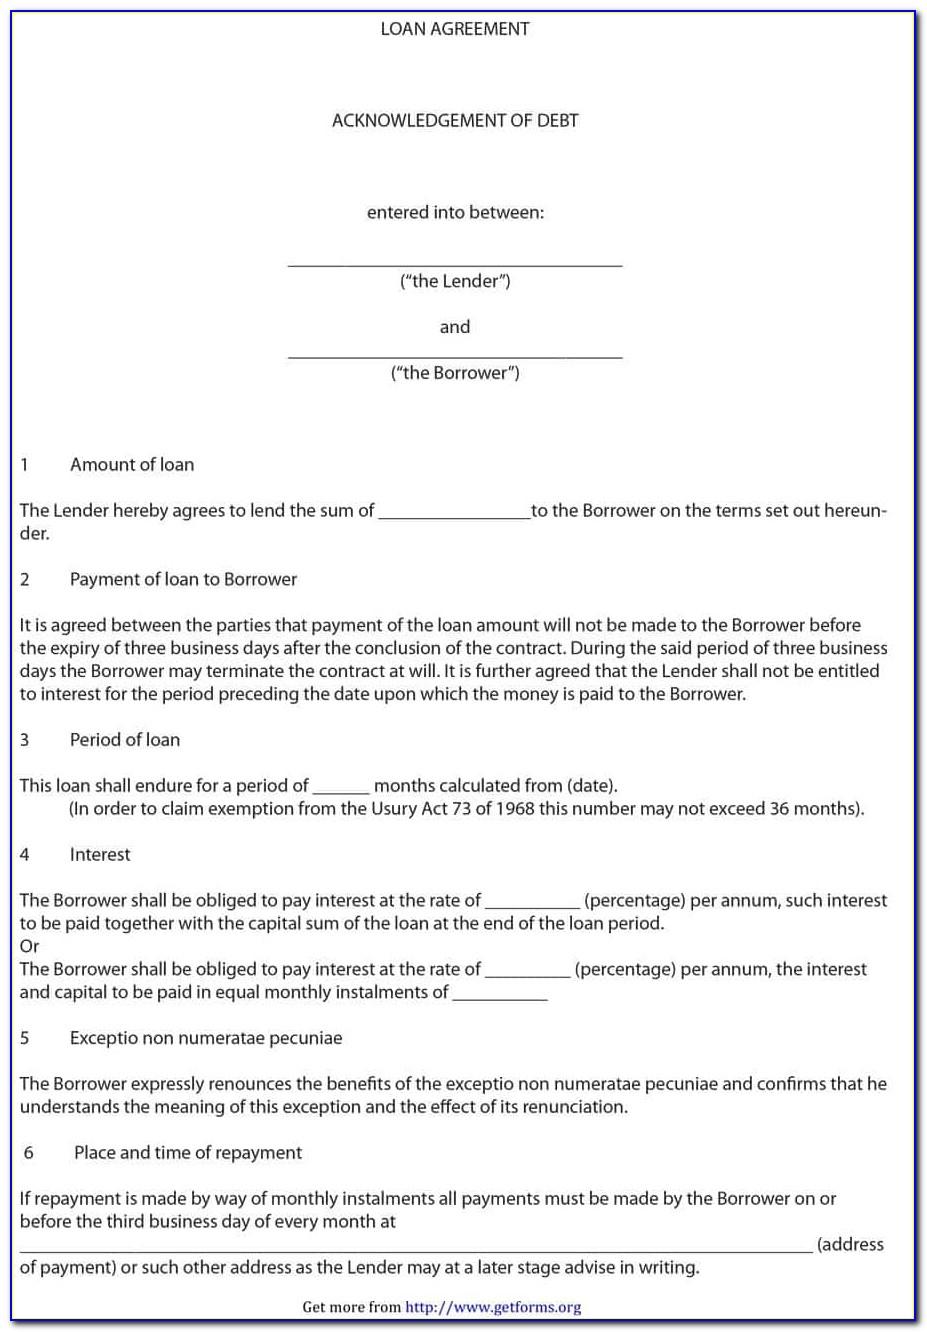 Simple Family Loan Agreement Template Free